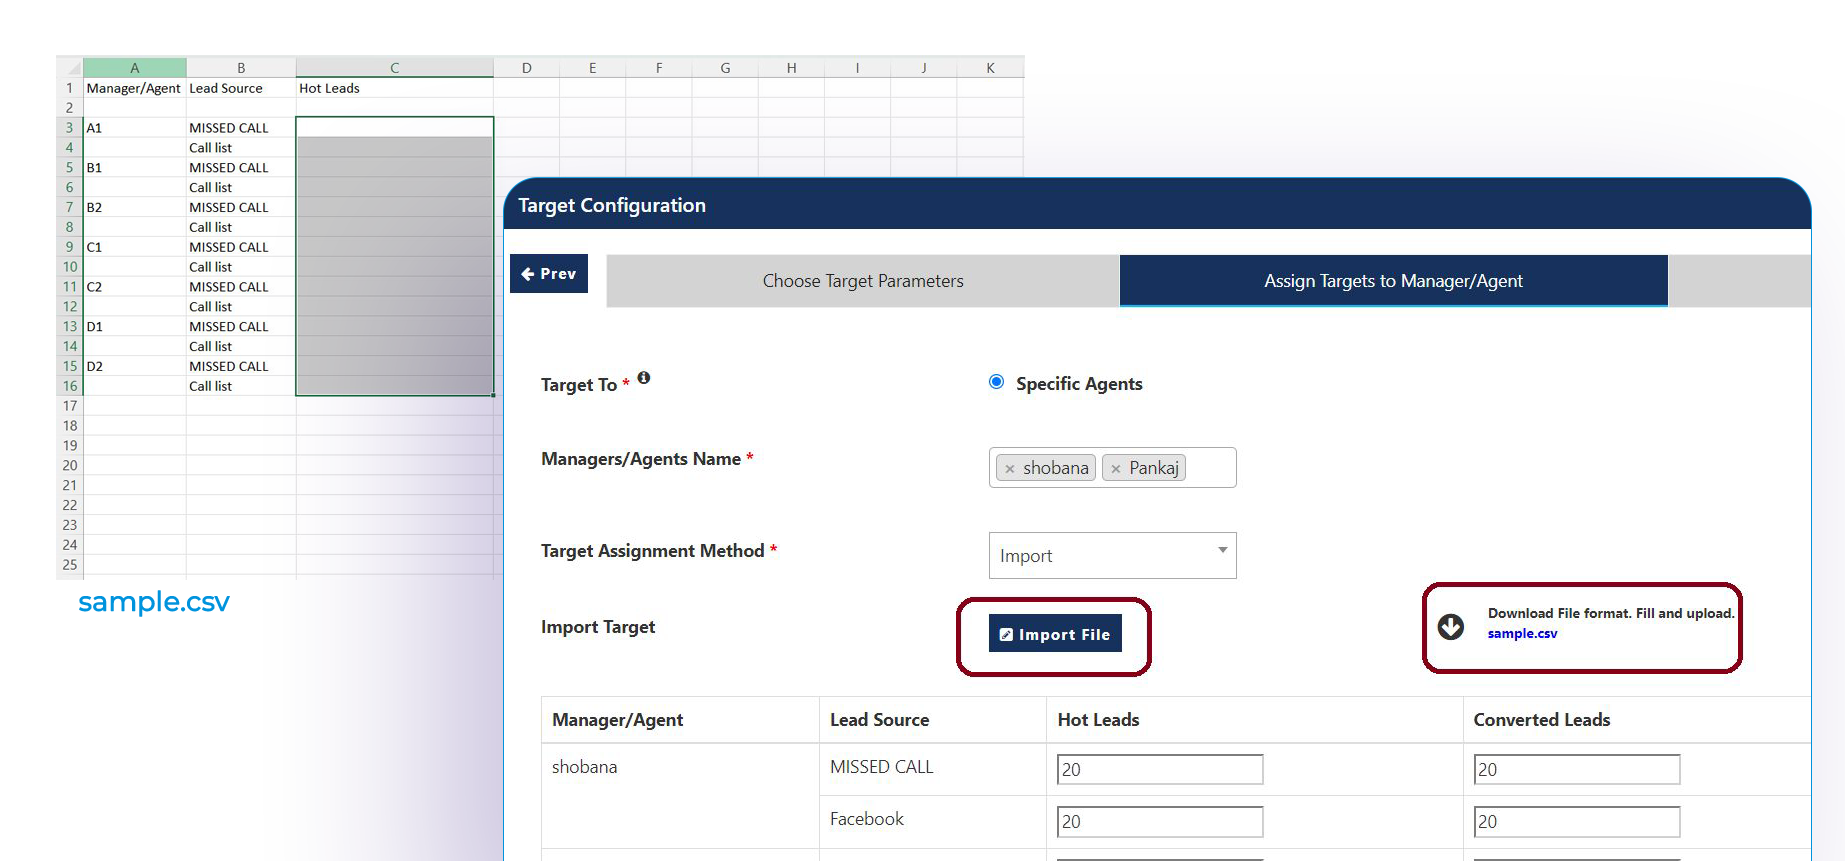 User Guide: How to Use the Target Management Feature?